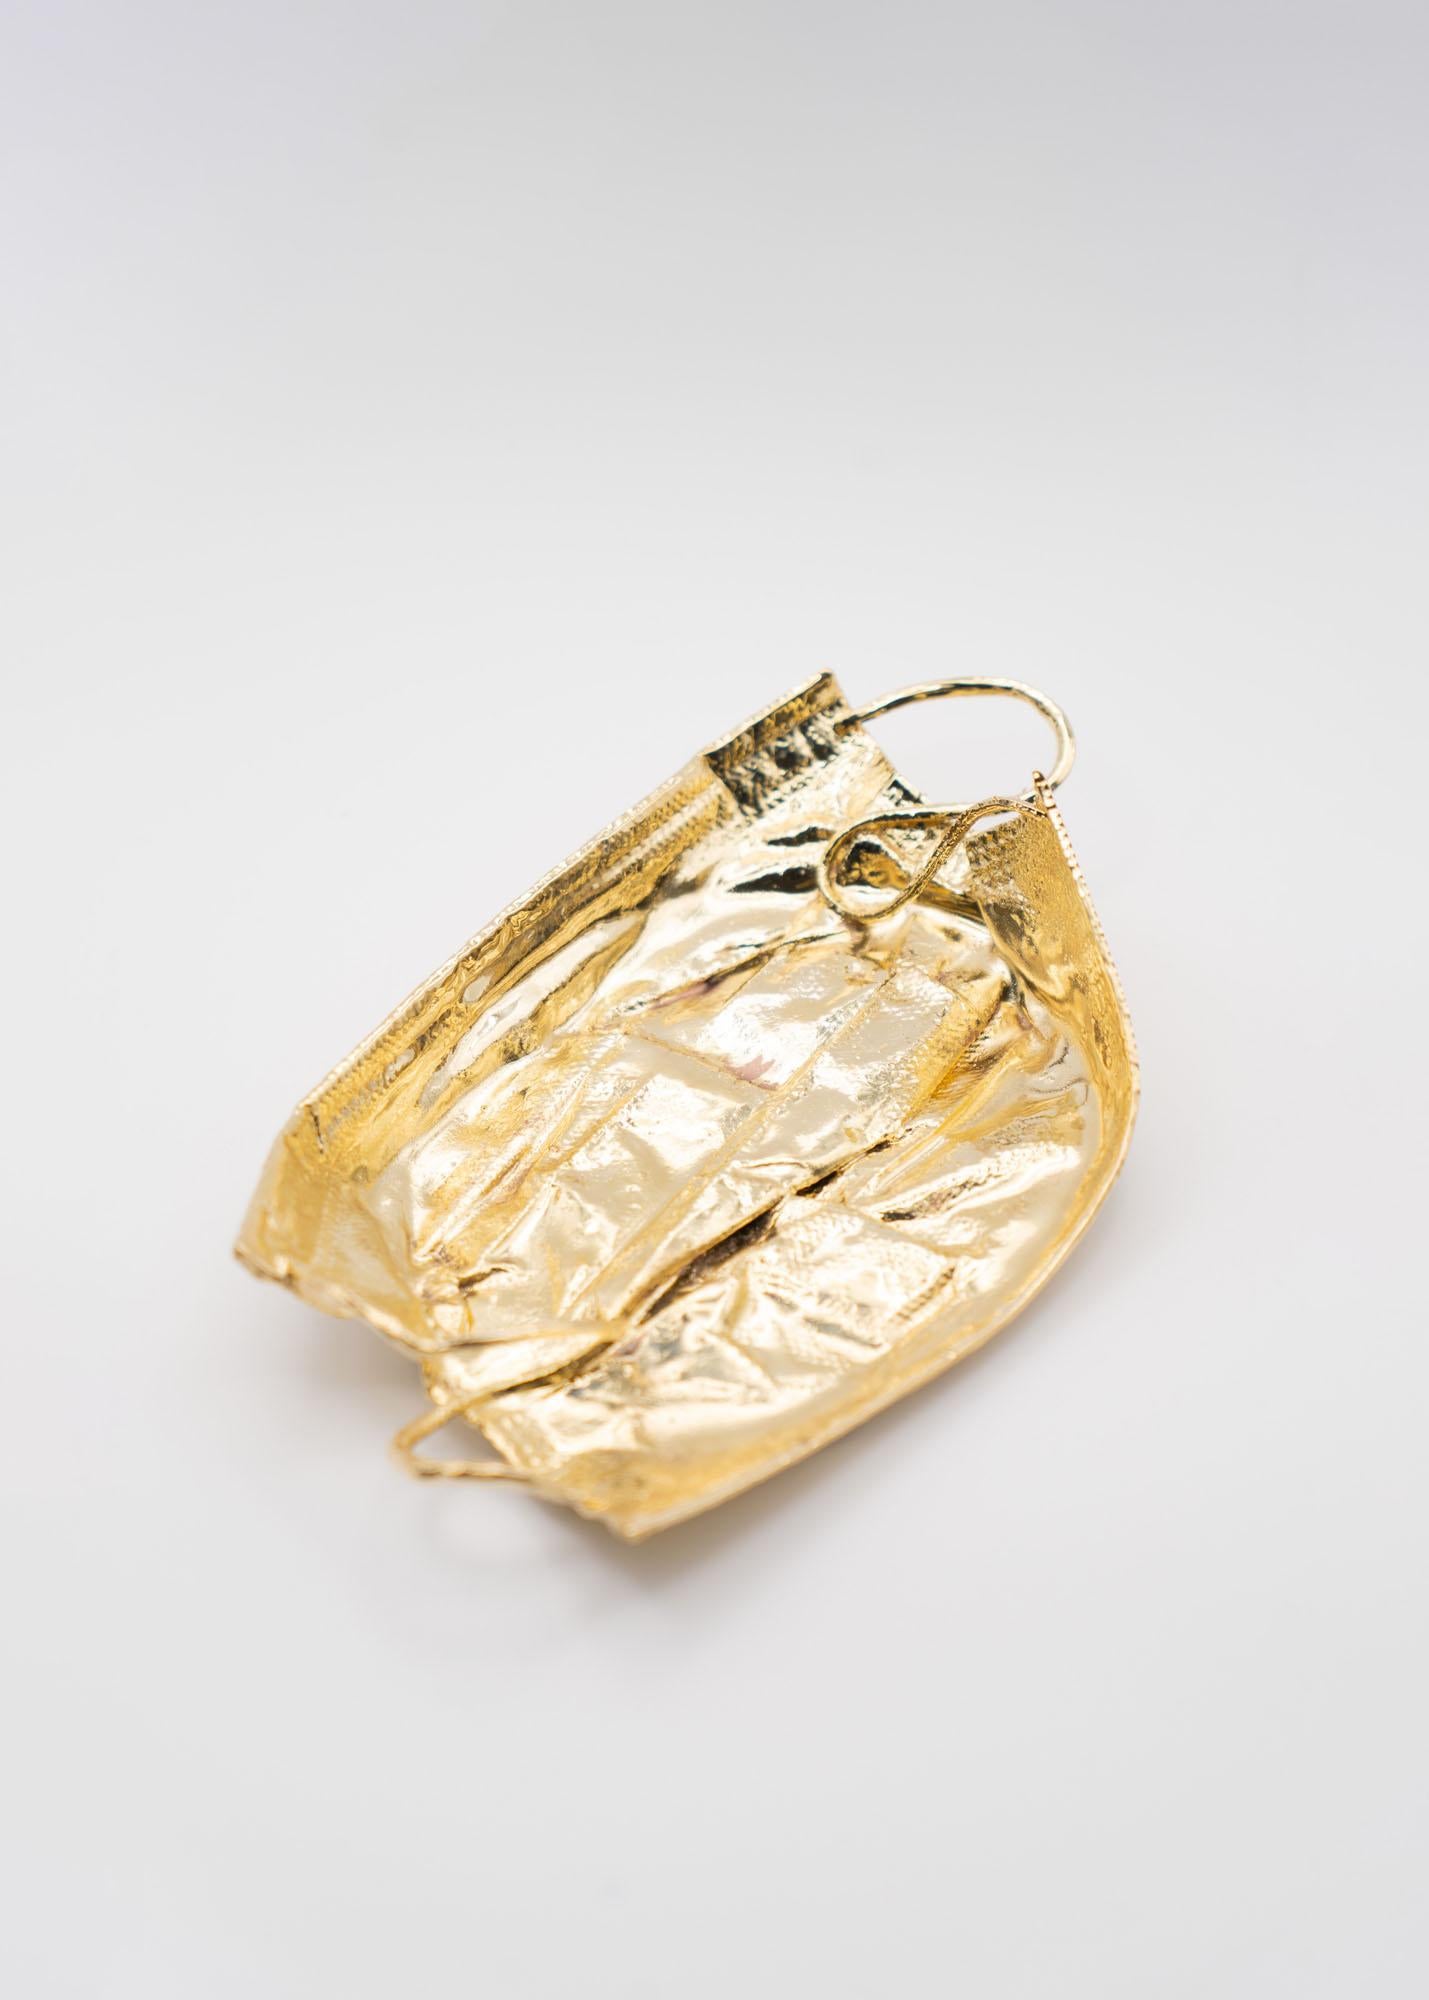 Galvanized Remask Act 023 Gold Art Object Made from Surgical Mask by Enrico Girotti For Sale